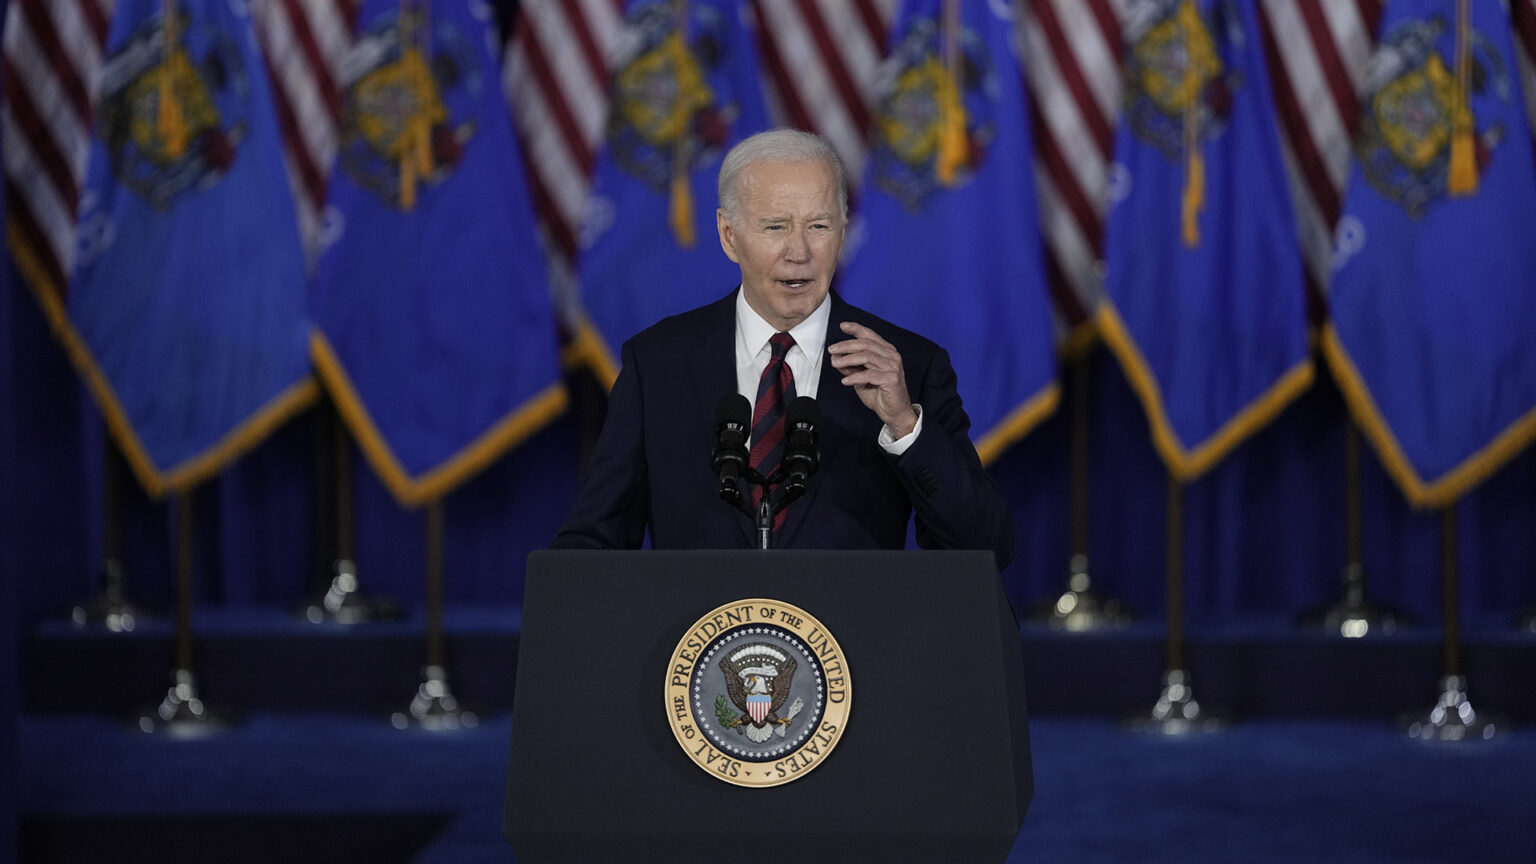 Joe Biden speaks and gestures with his left hand while standing behind a podium with two mounted microphones and affixed with the Seal of the President of the United States, with rows of U.S. and Wisconsin flags in front of a stage curtain in the background.